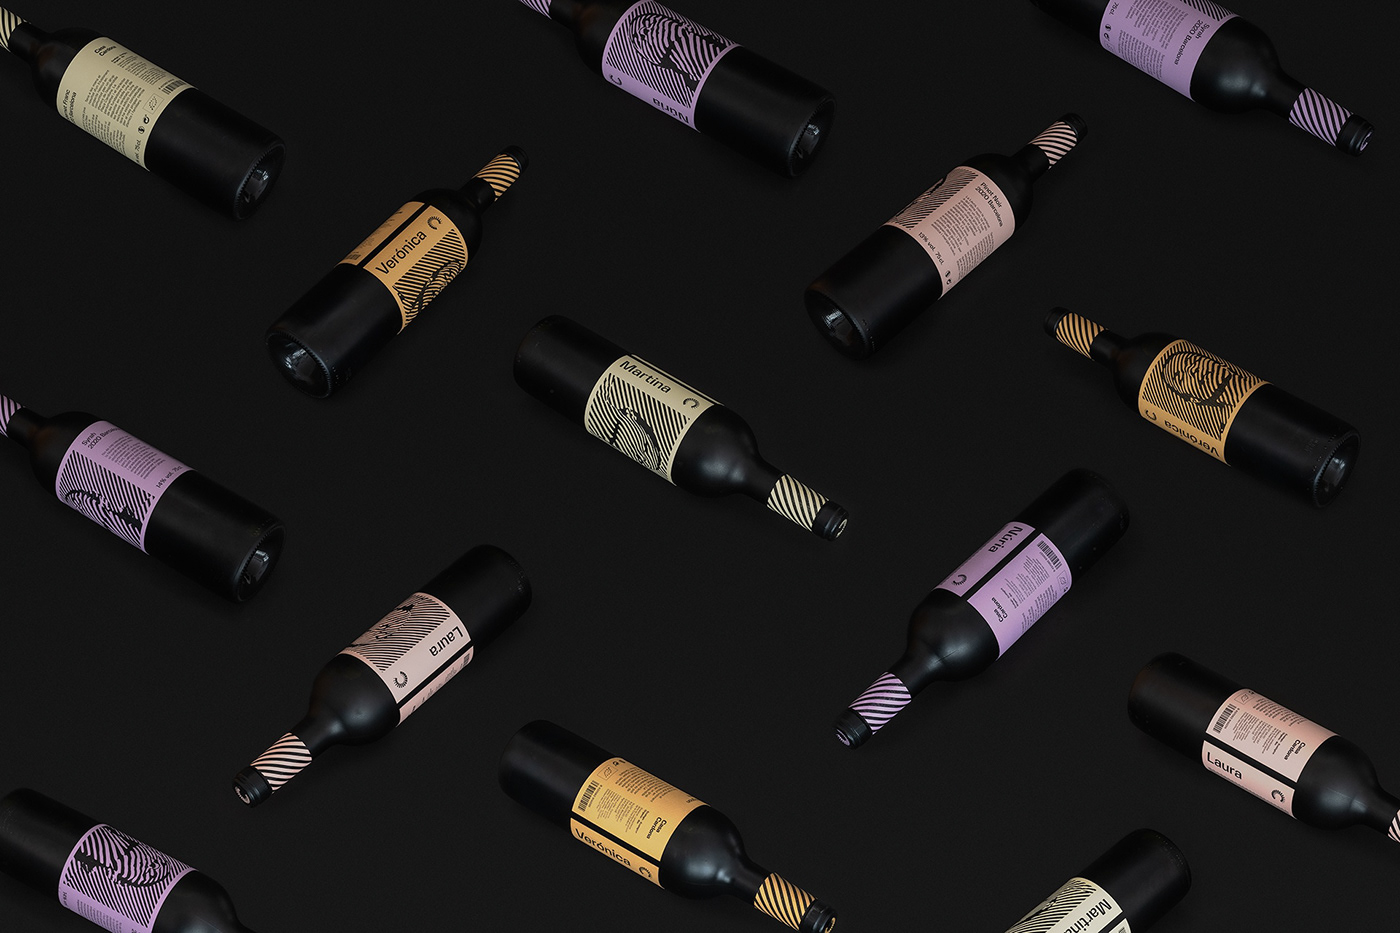 Casa Cardona wines. Group shot of the bottles in isometric view creating a seamless image